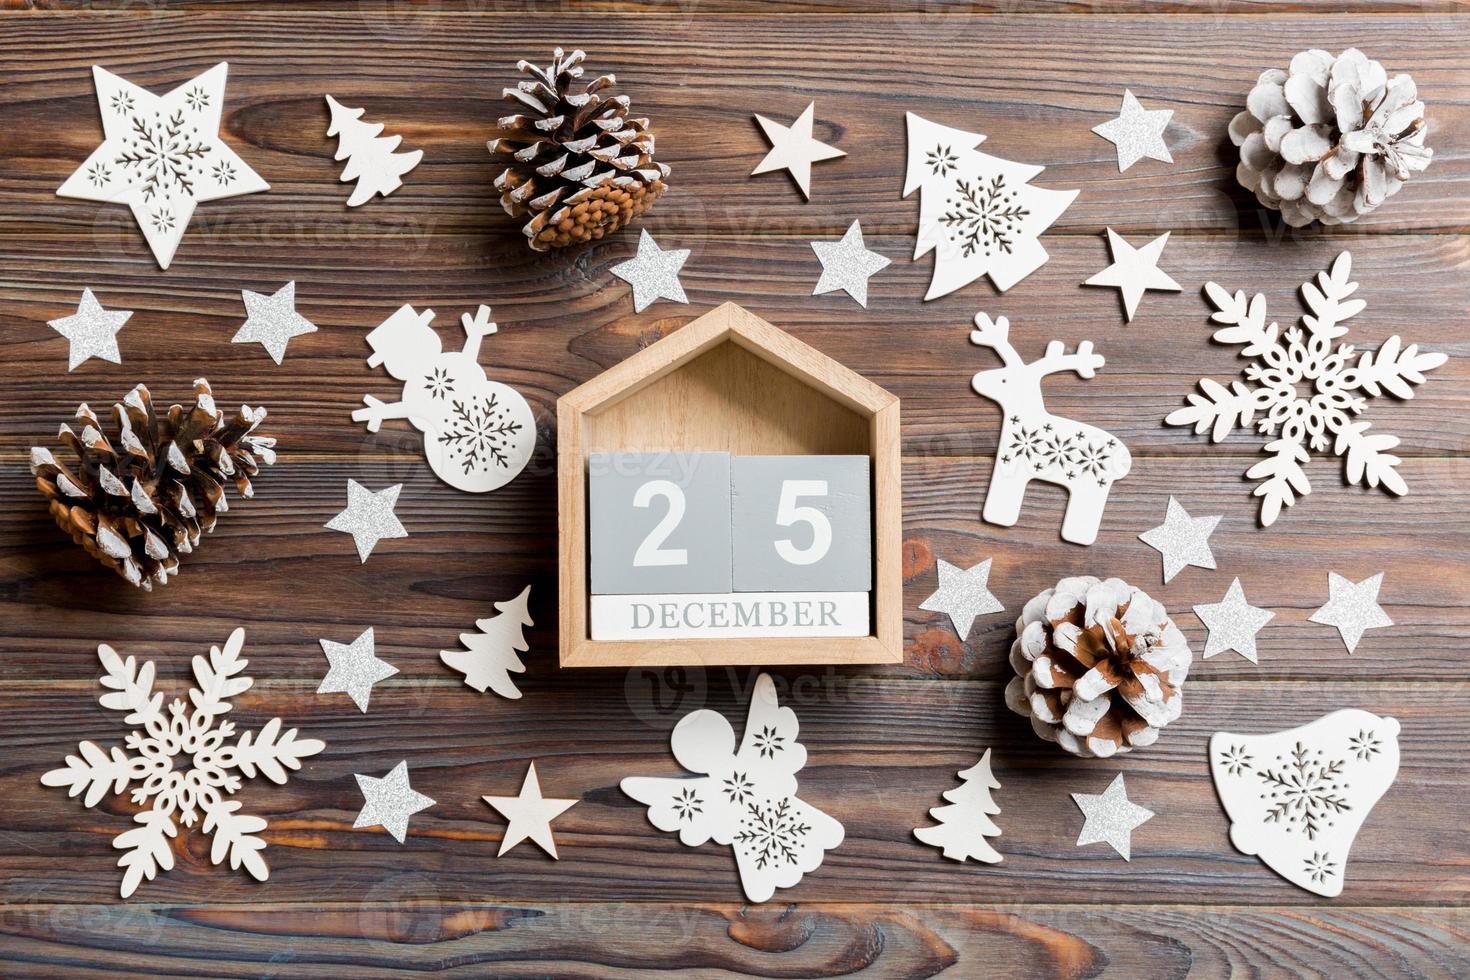 Top view of calendar on Christmas wooden background. The twenty fifth of December. New Year toys and decorations. Holiday concept photo